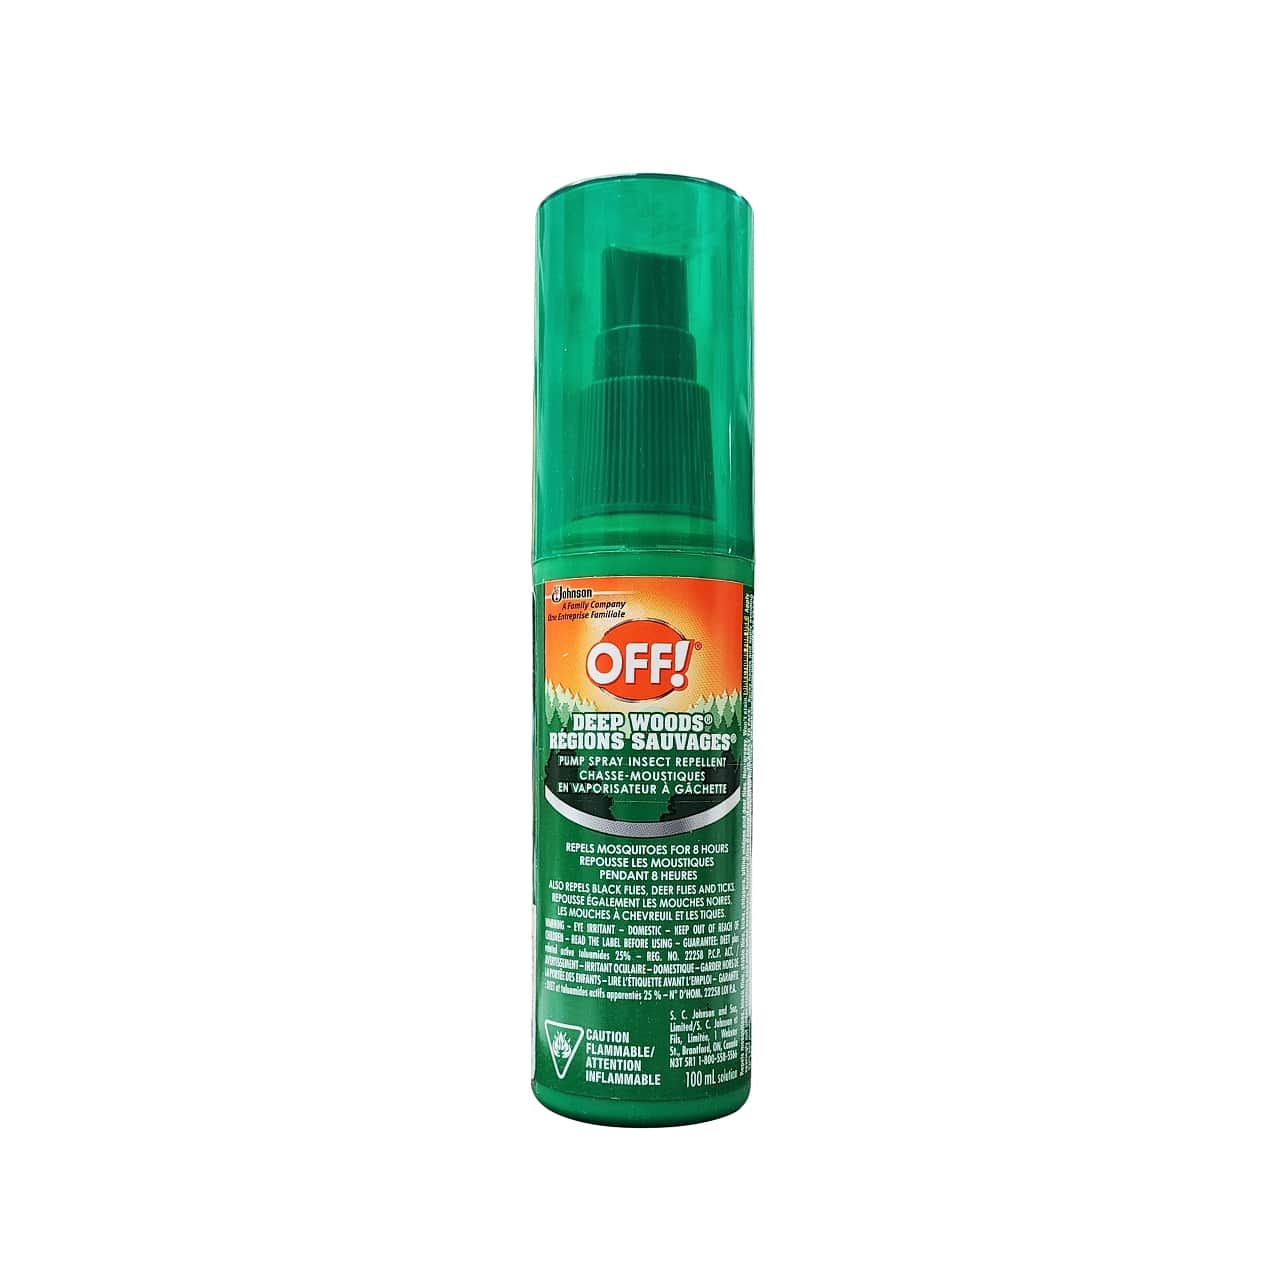 Product label for Off! Deep Woods Pump Spray Insect Repellent (100 mL)